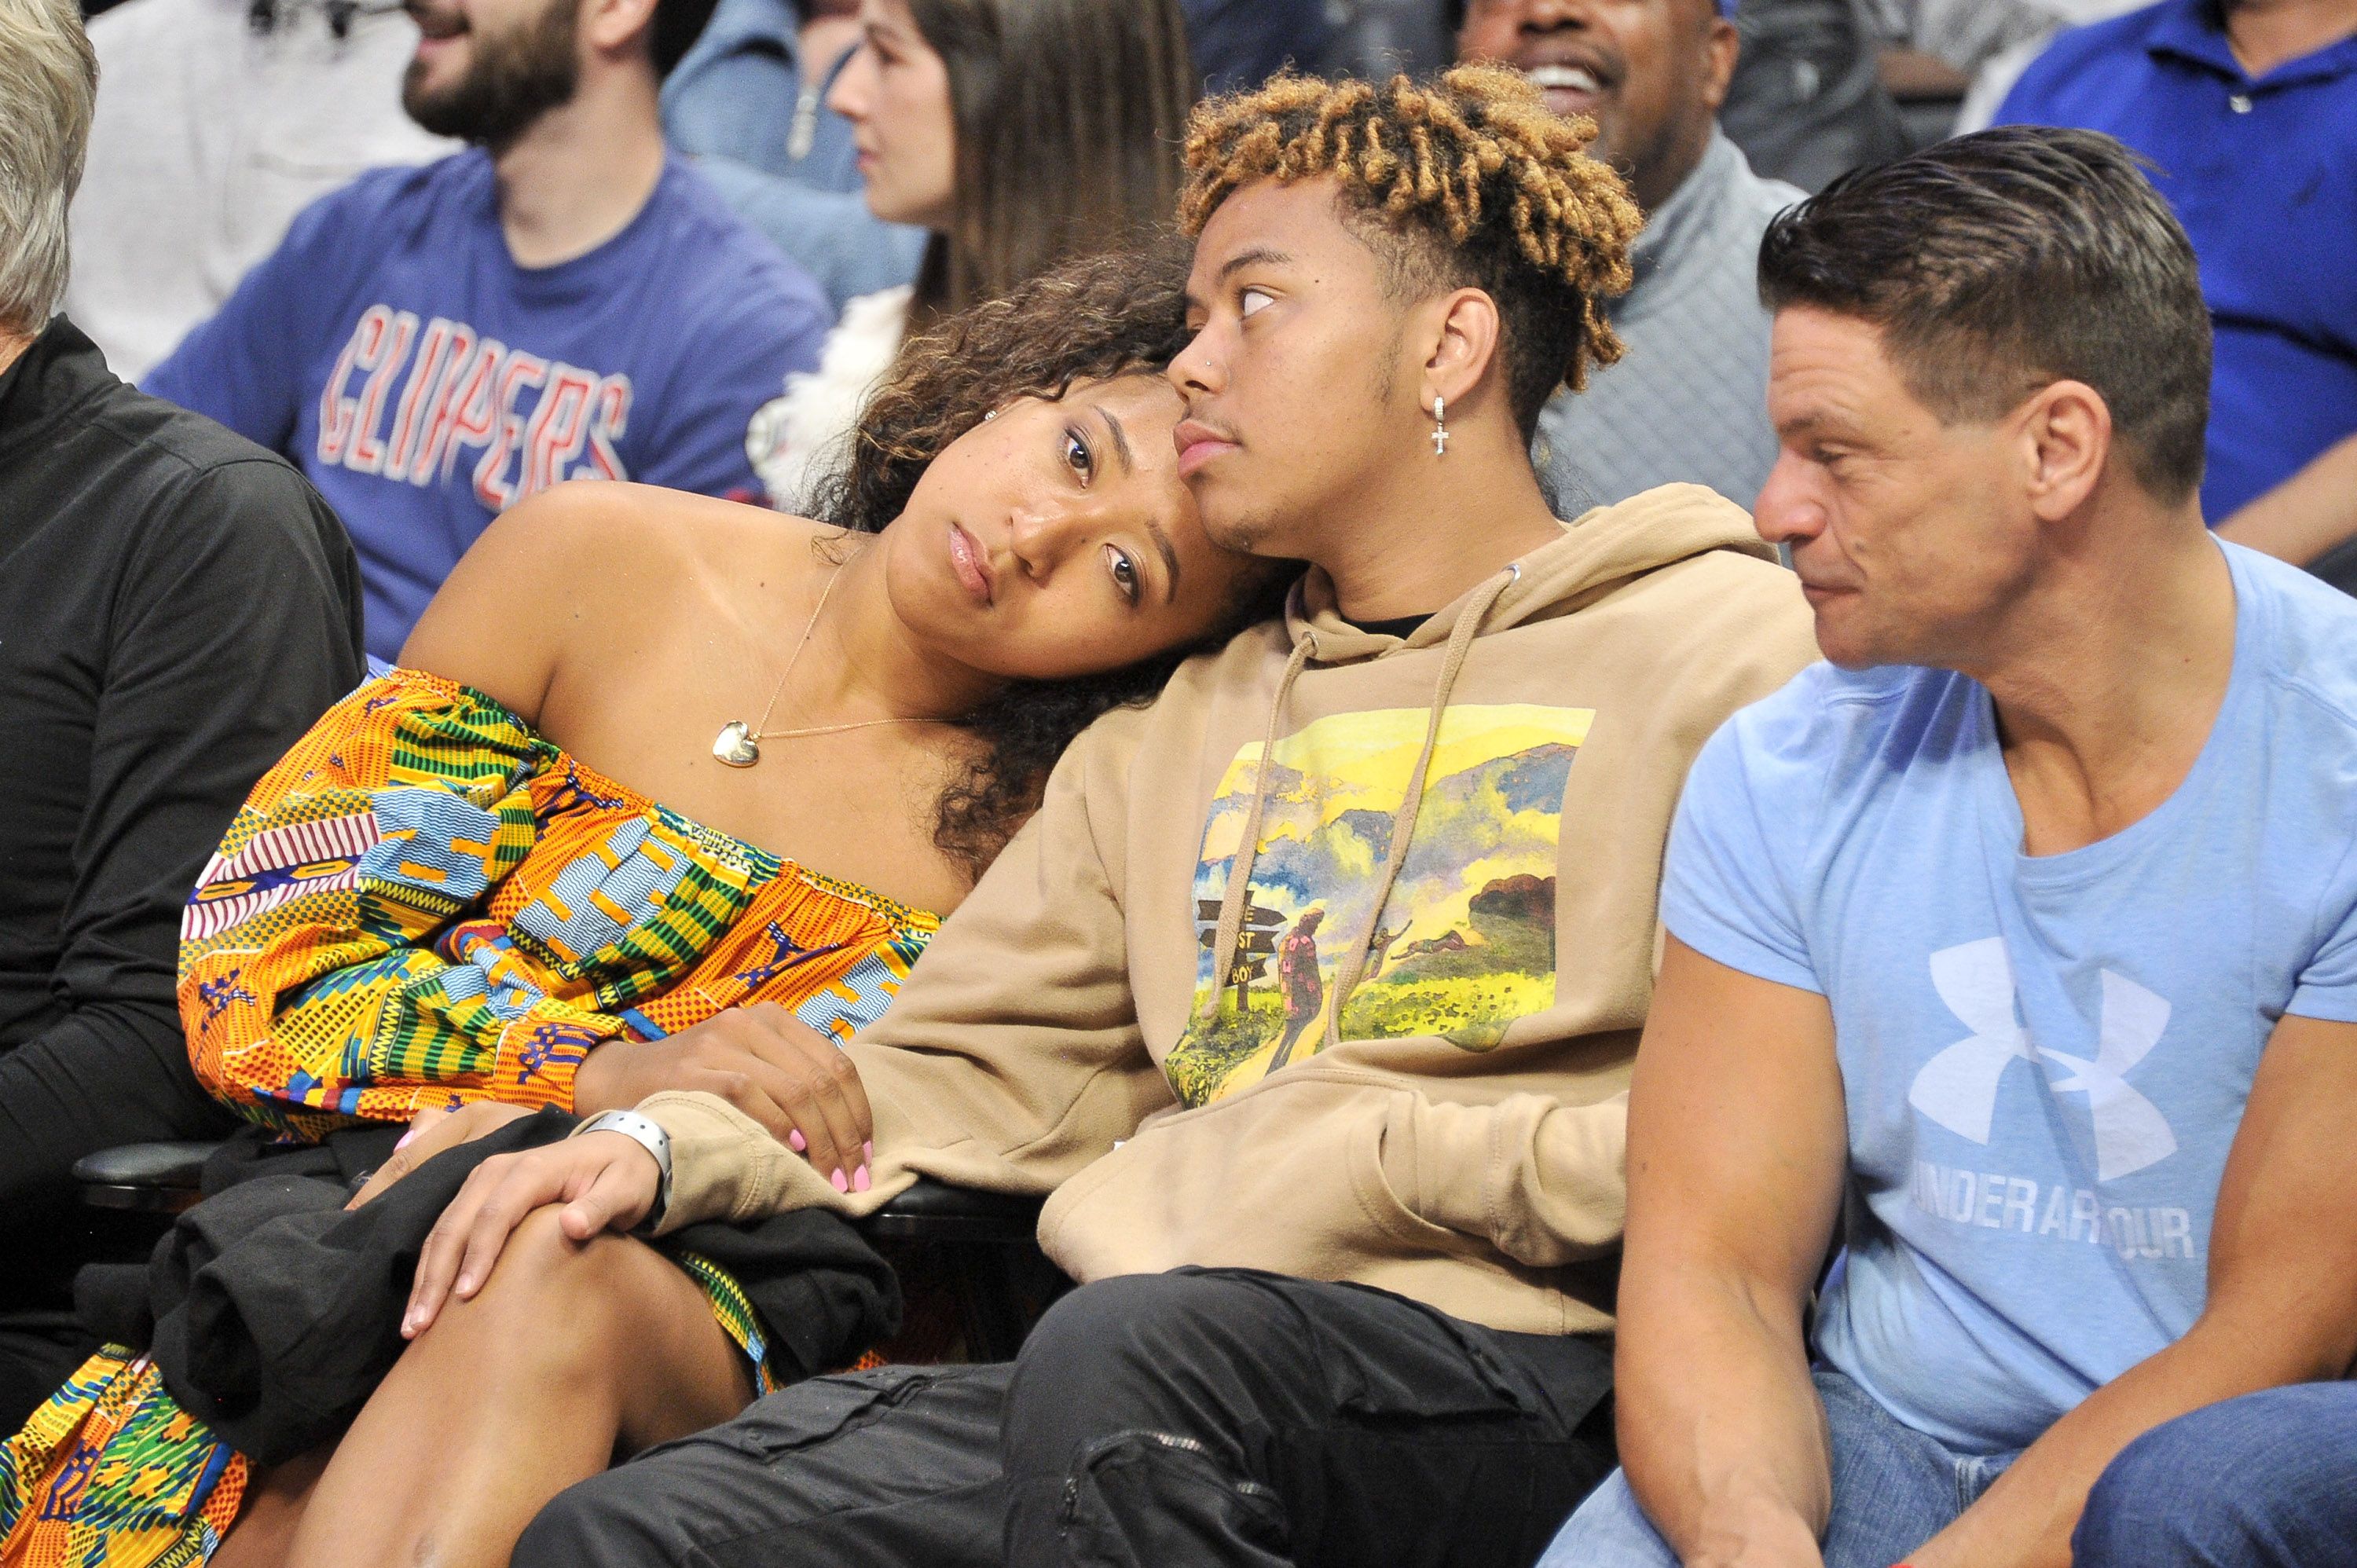 Naomi Osaka & Cordae: The Coolest Young Couple on the Planet Right Now